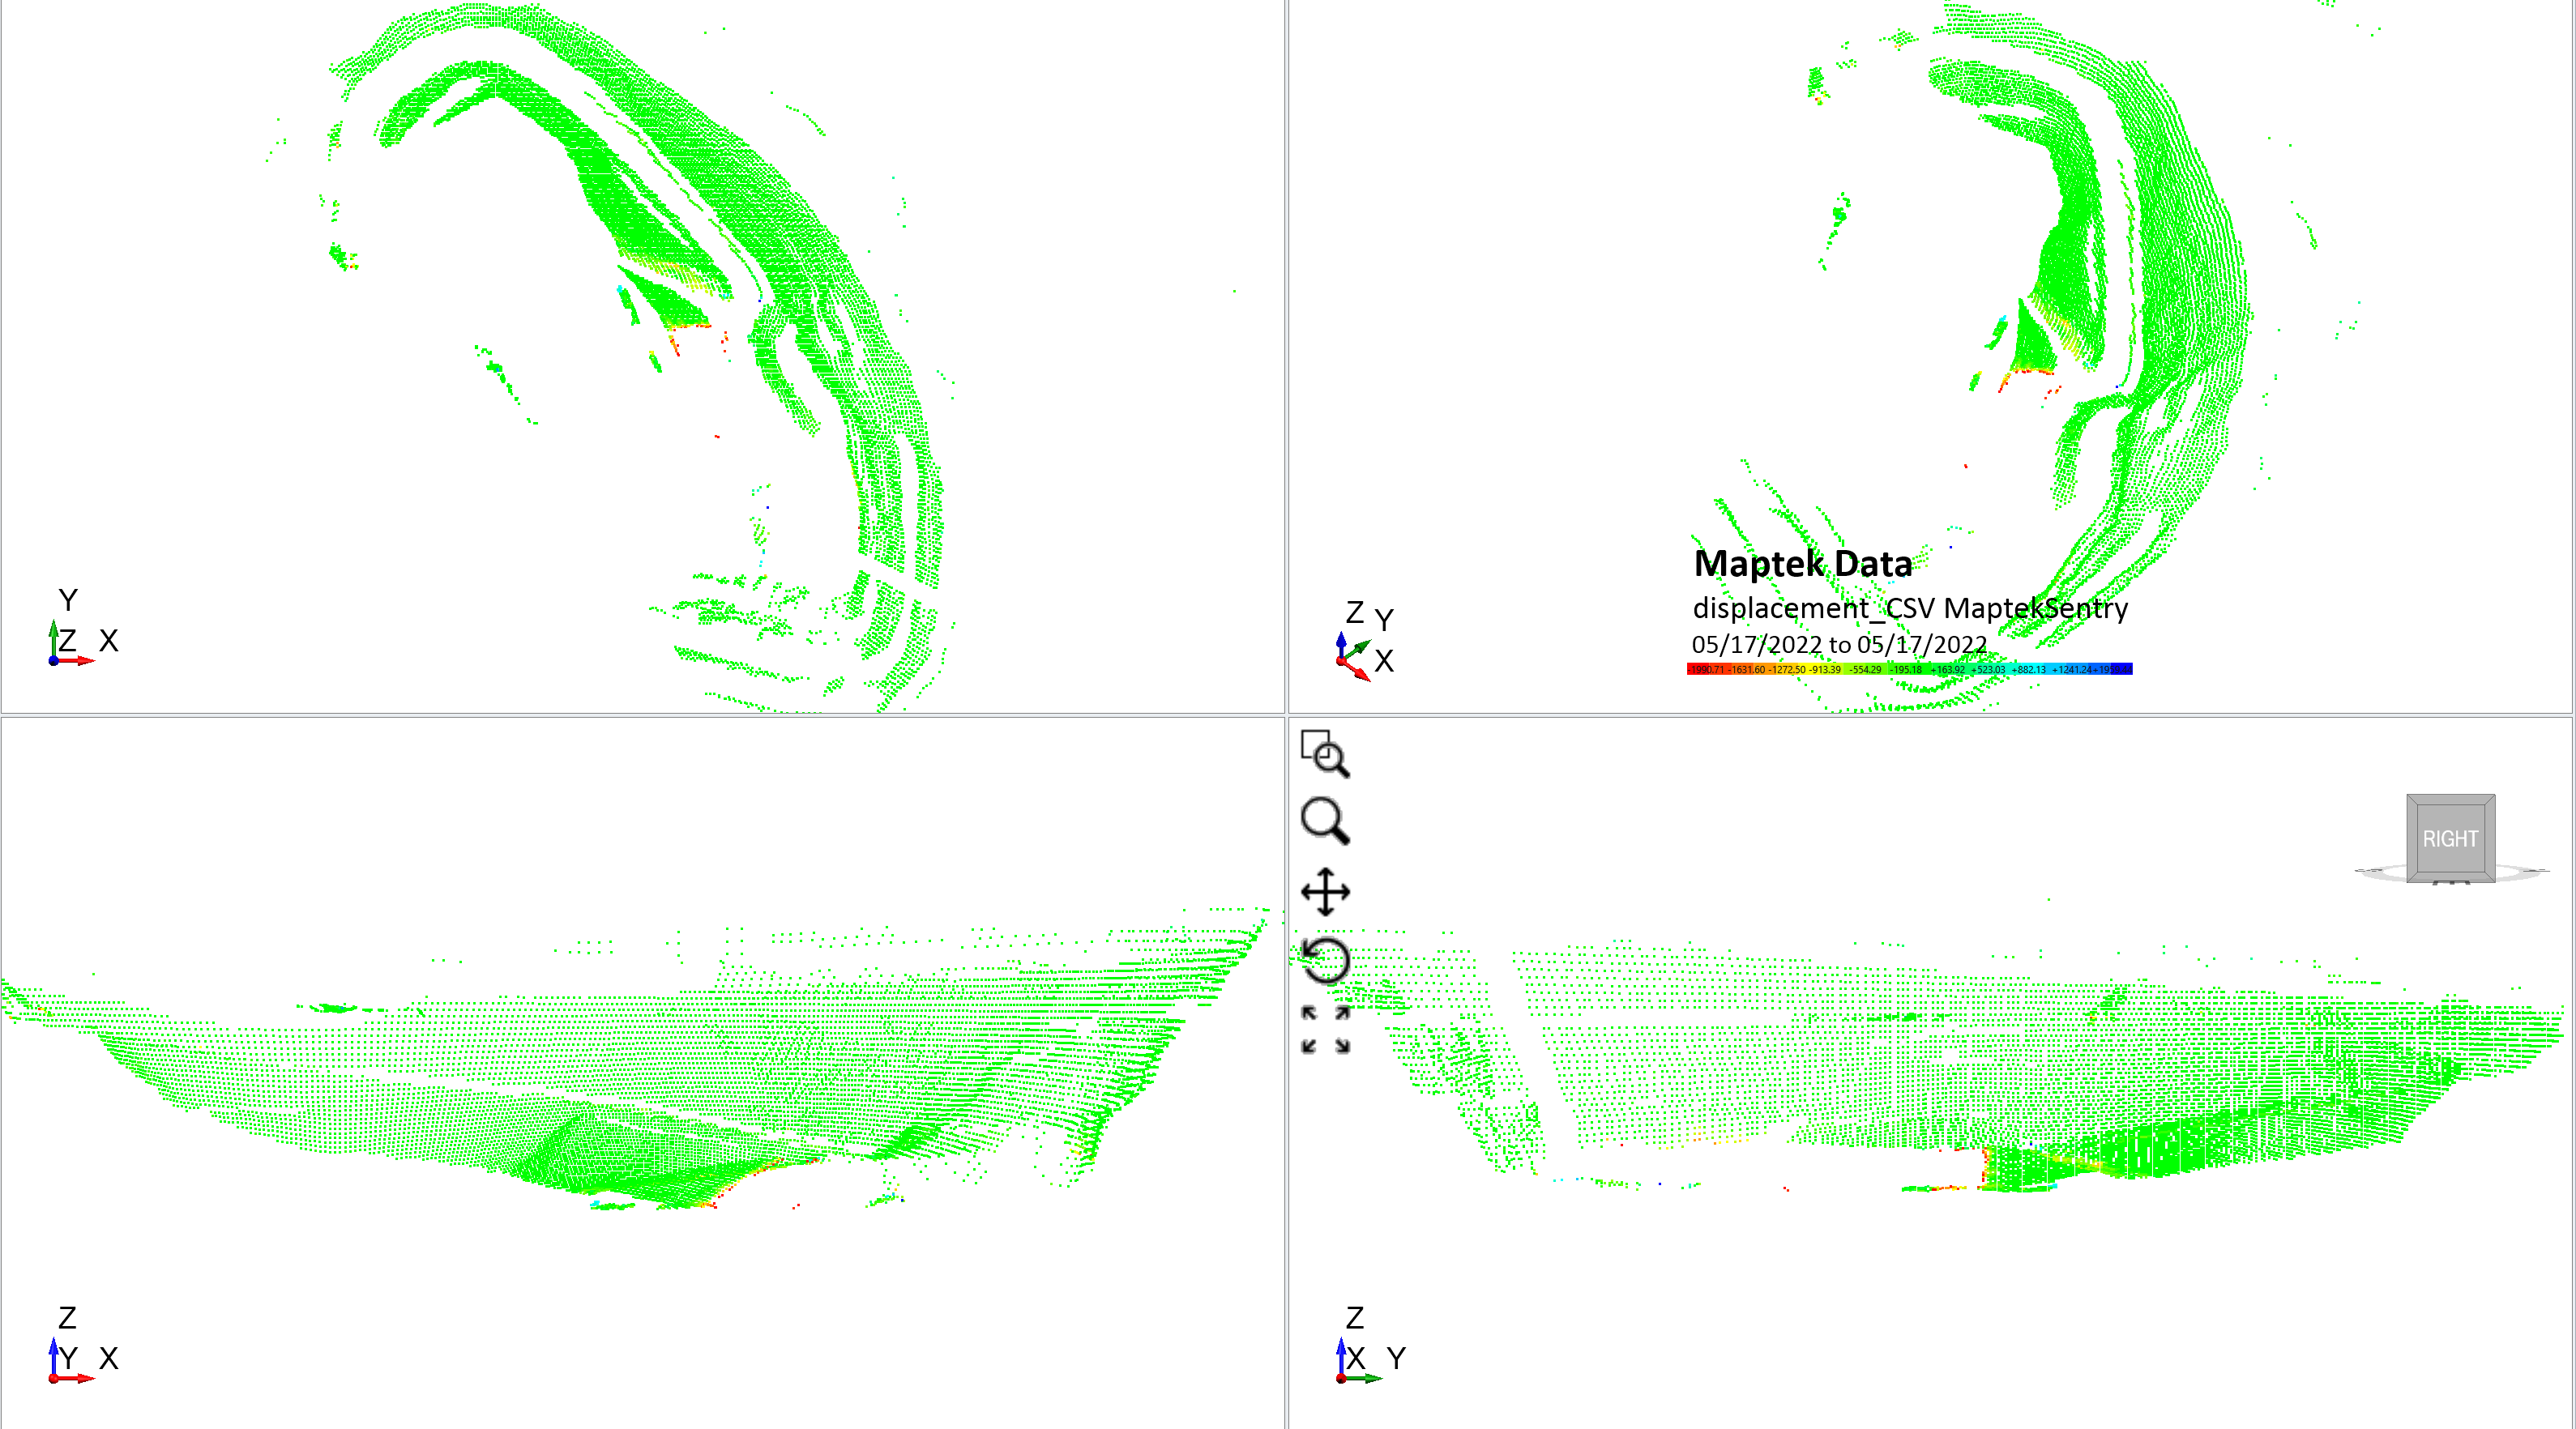 Example of imported maptek point cloud data